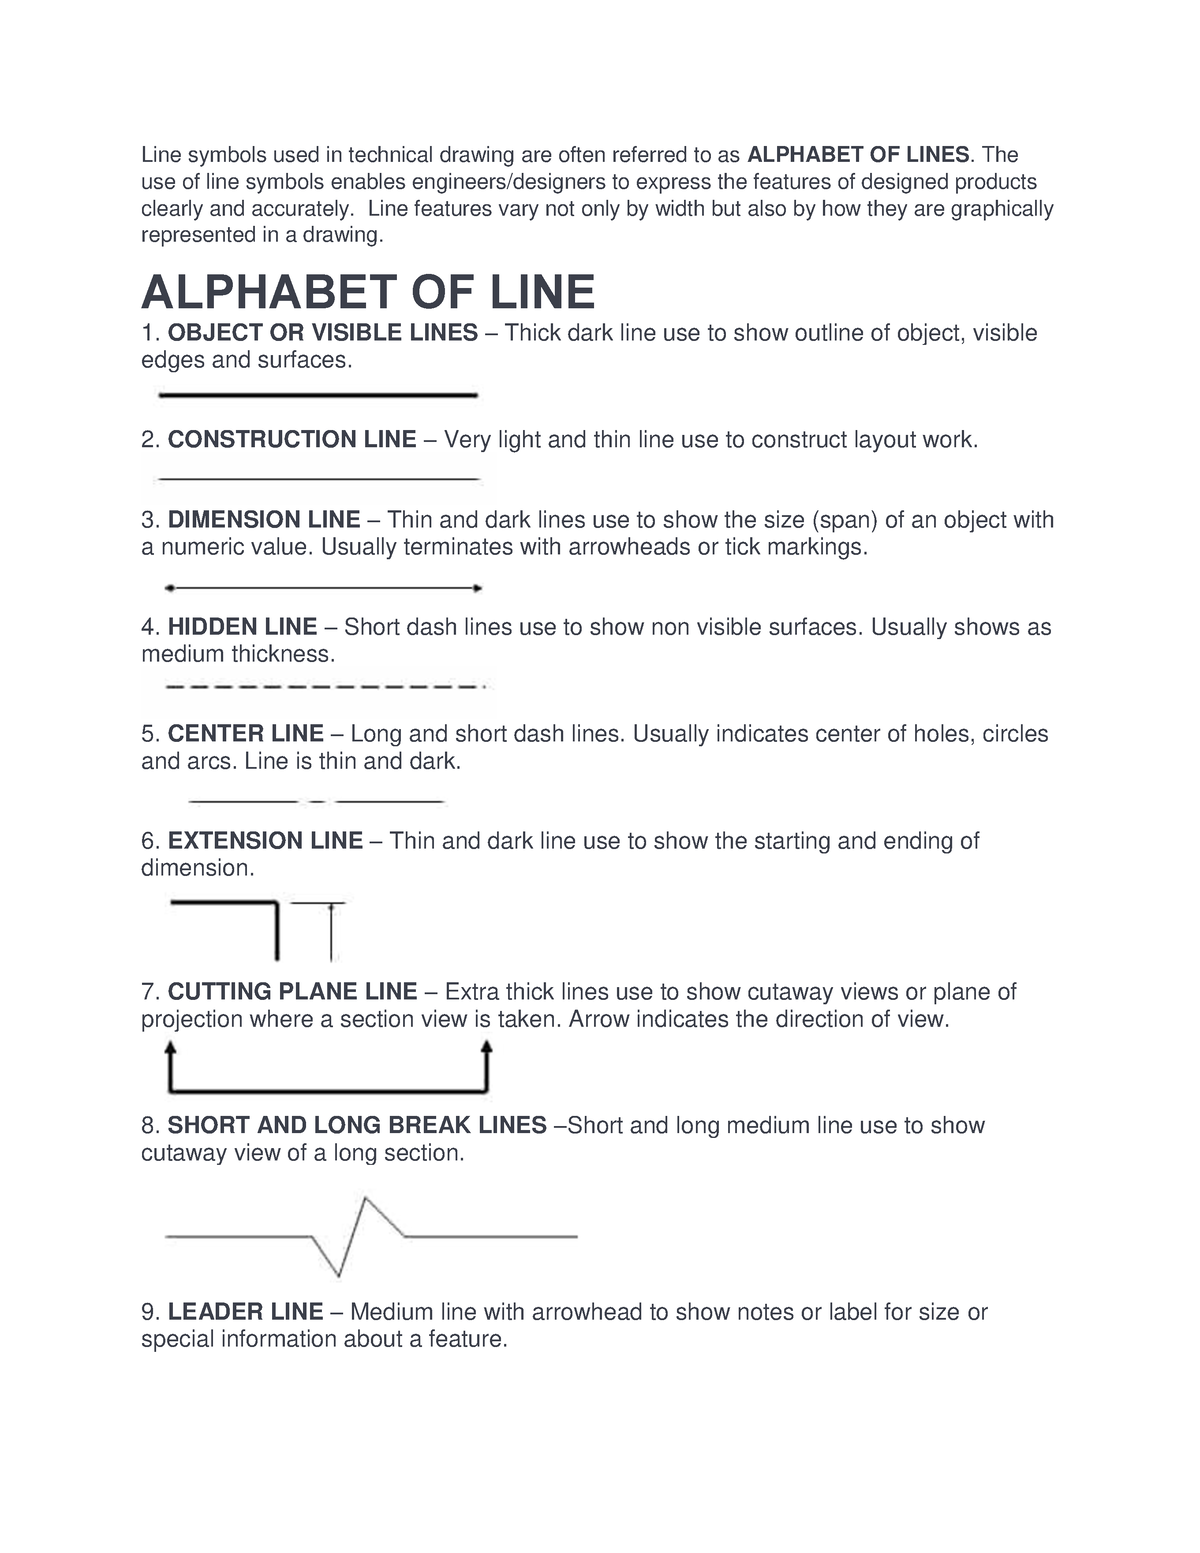 Alphabet OF Lines - practice line weights. - Line symbols used in